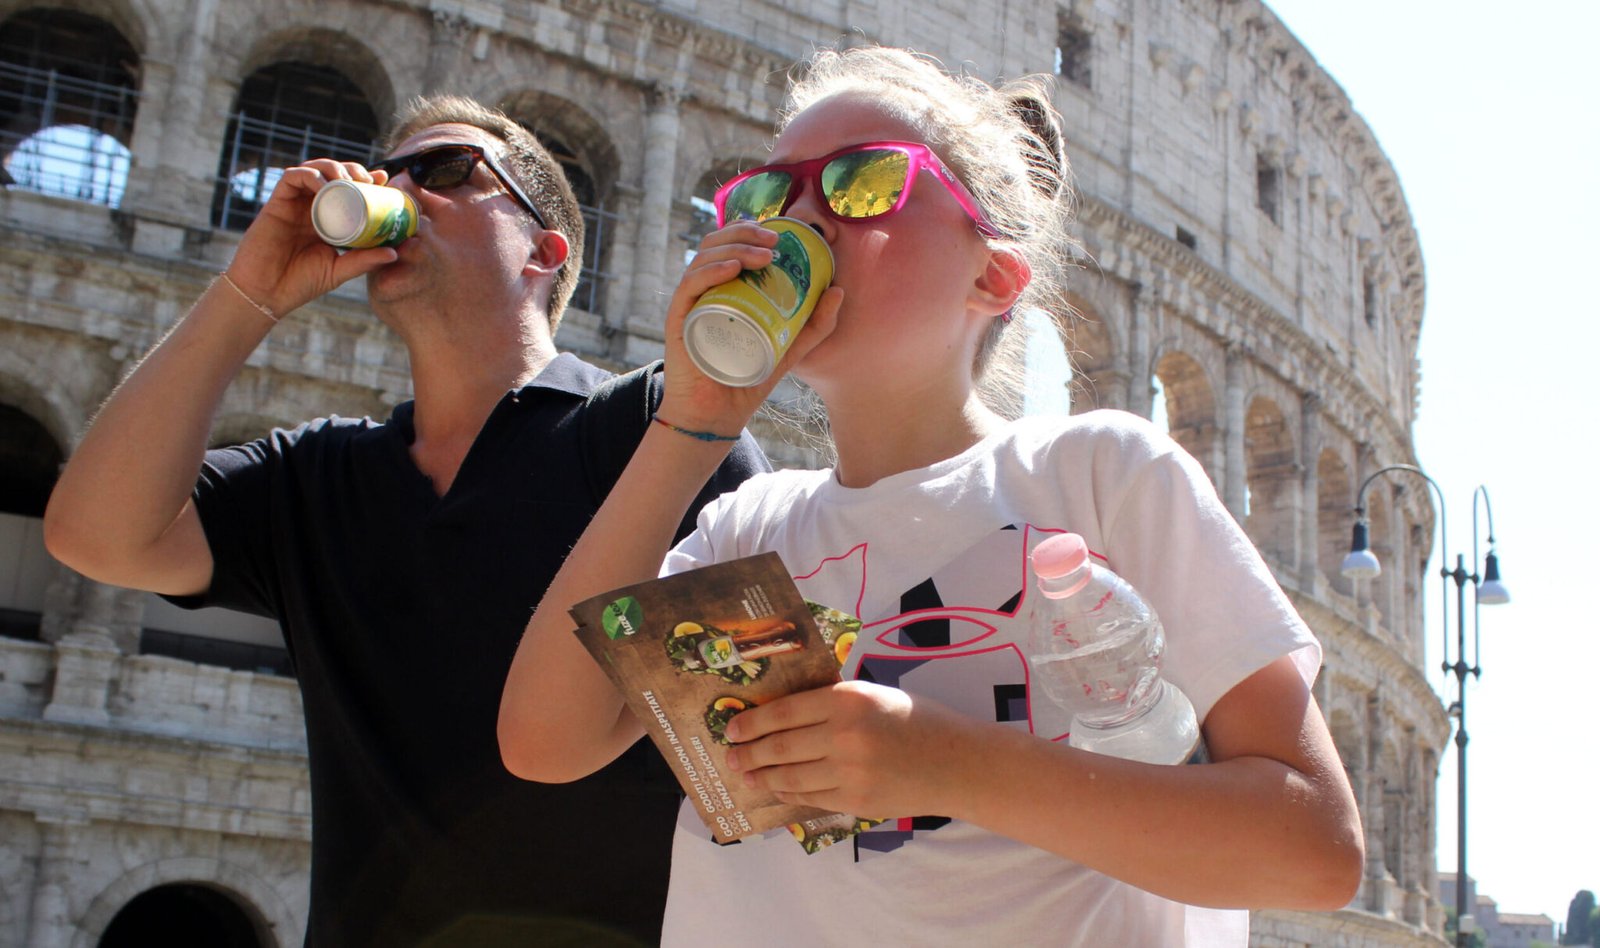 Tourists drink under the sun in front of the Colosseum